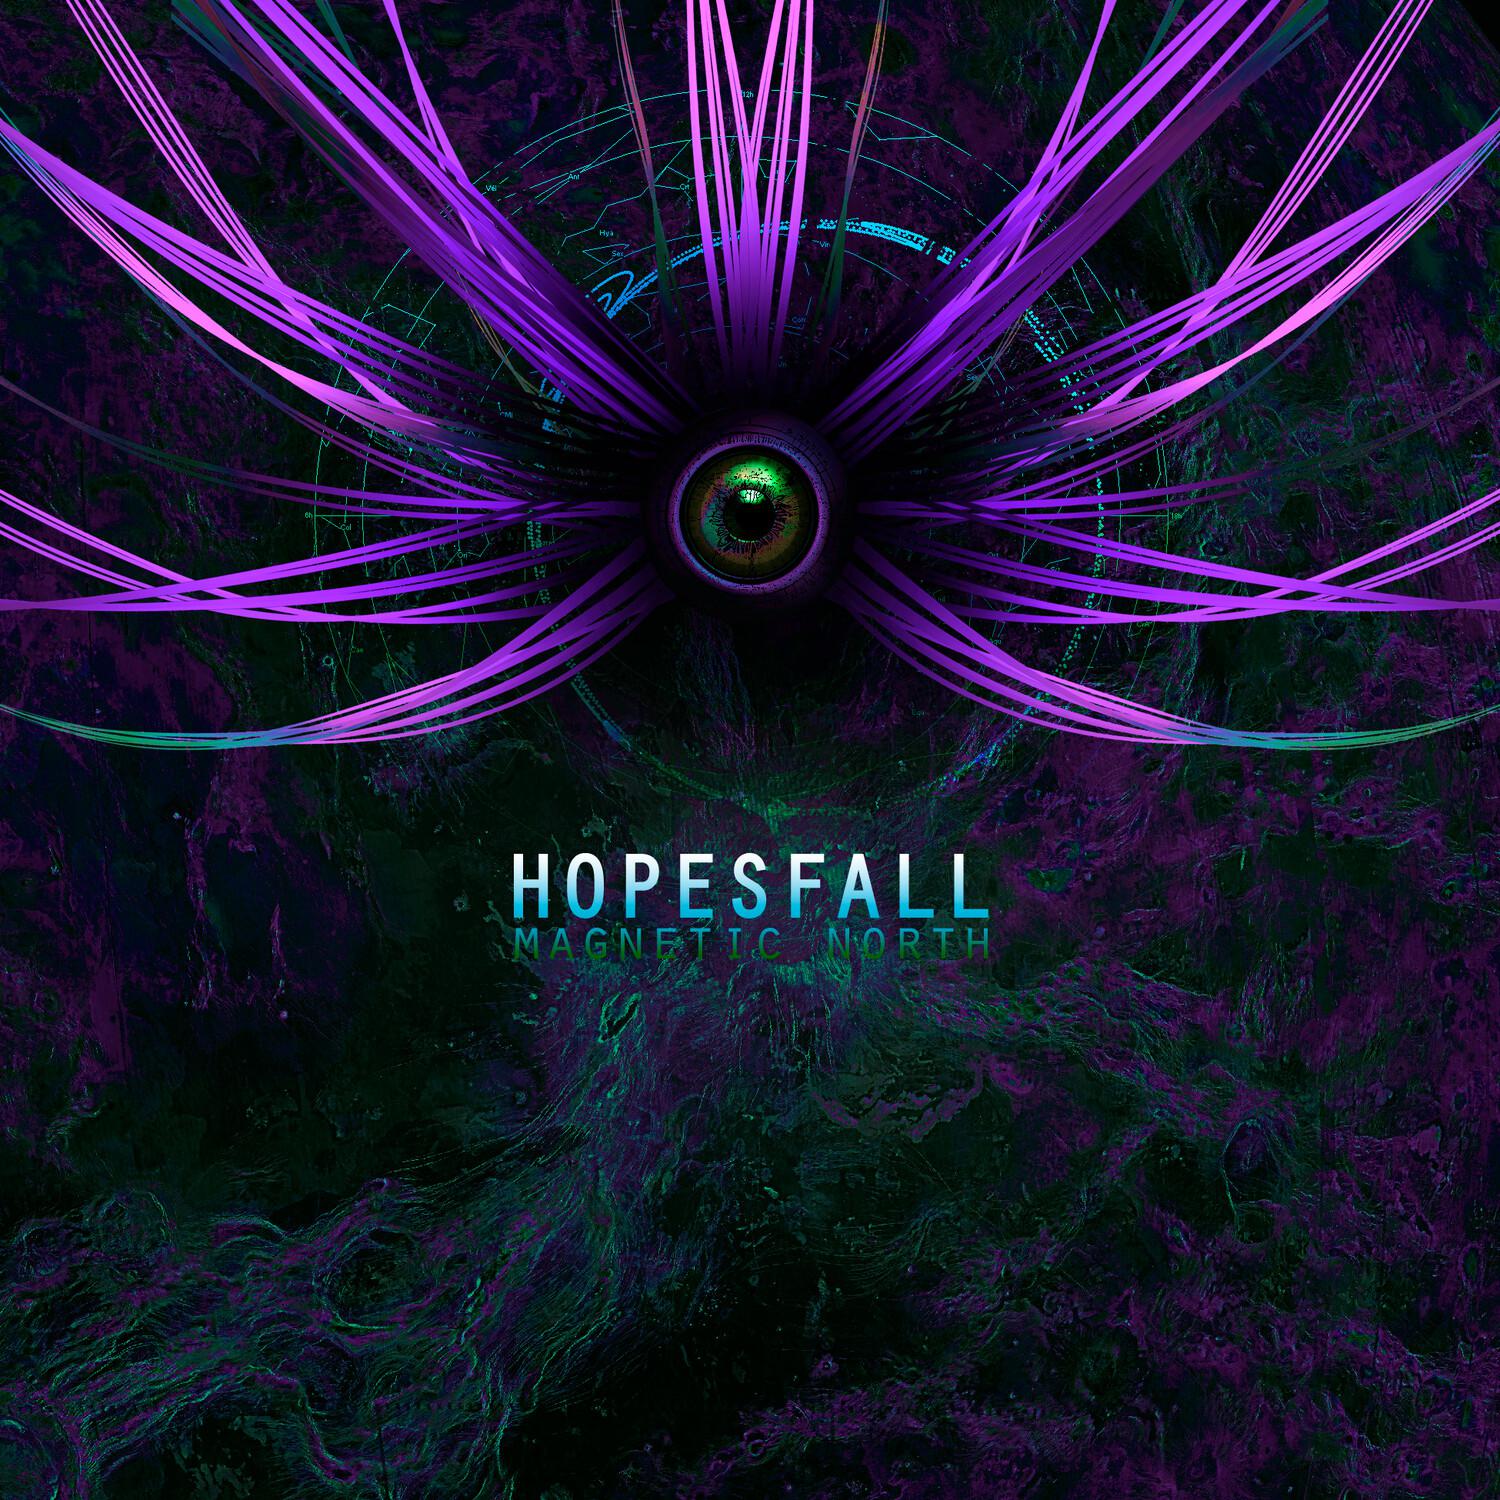 Hopesfall - I Can Do This On An Island